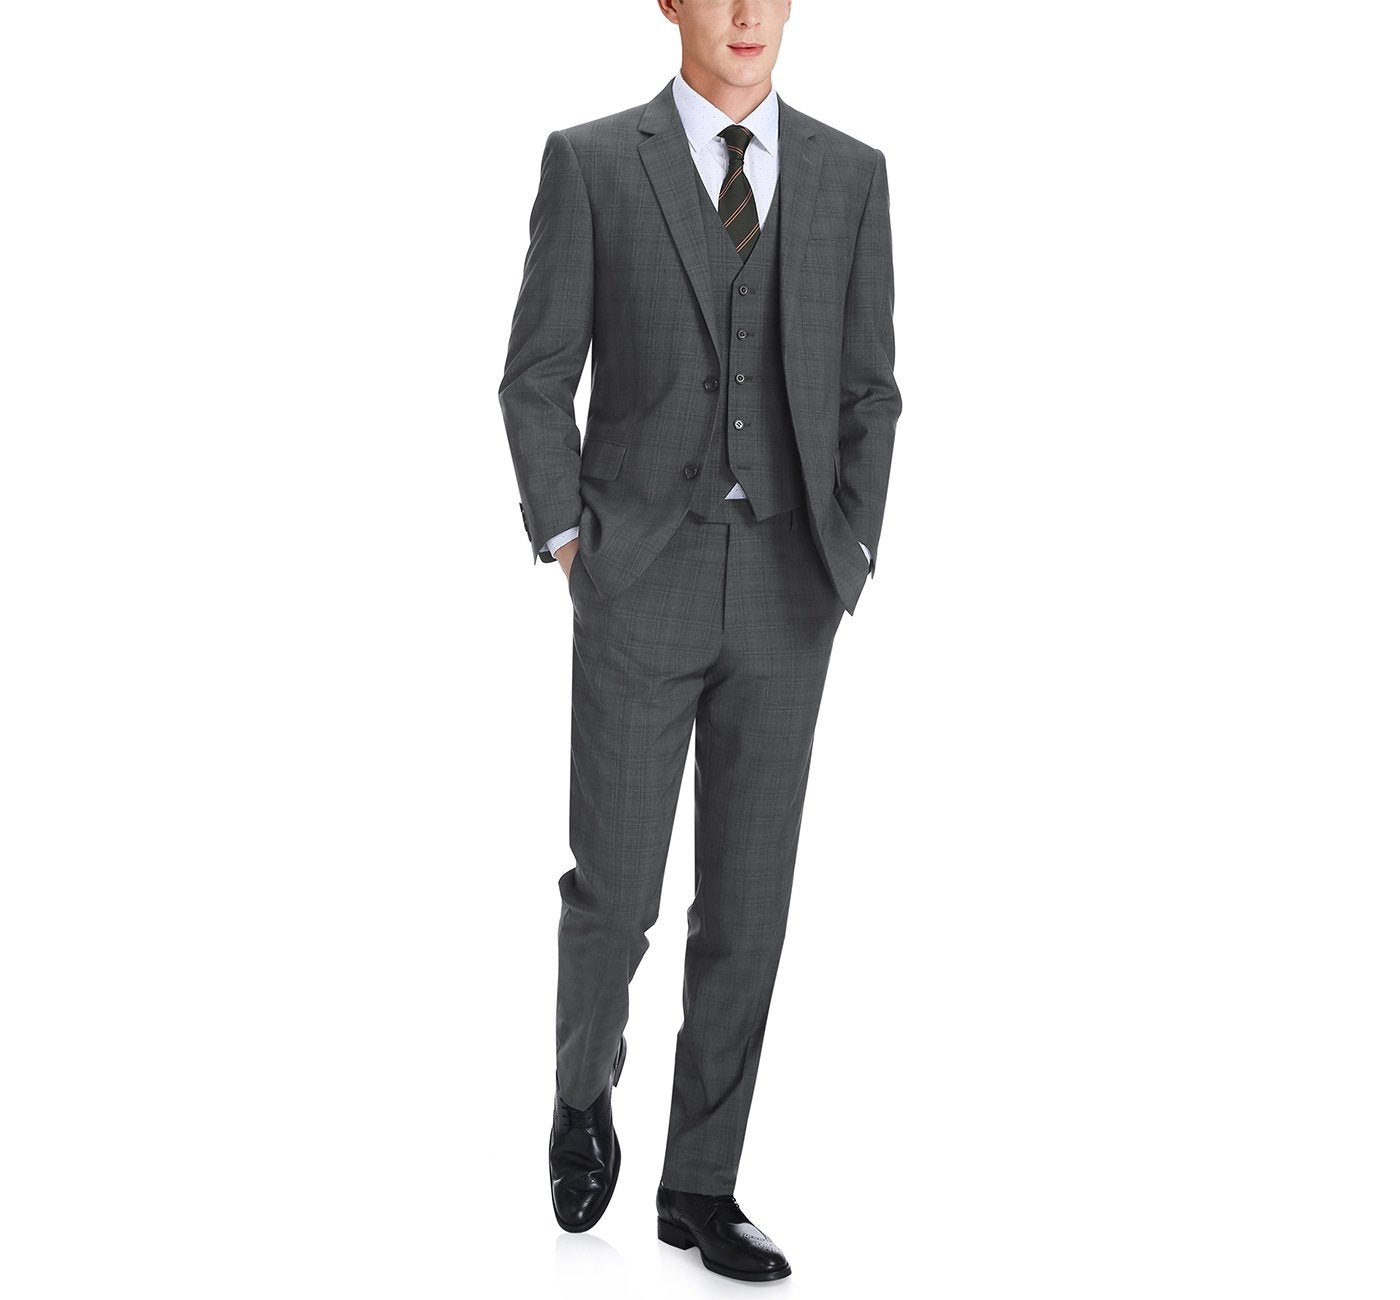 278-1 Men's 3-Piece Classic Fit Single Breasted Grey Windowpane Suit